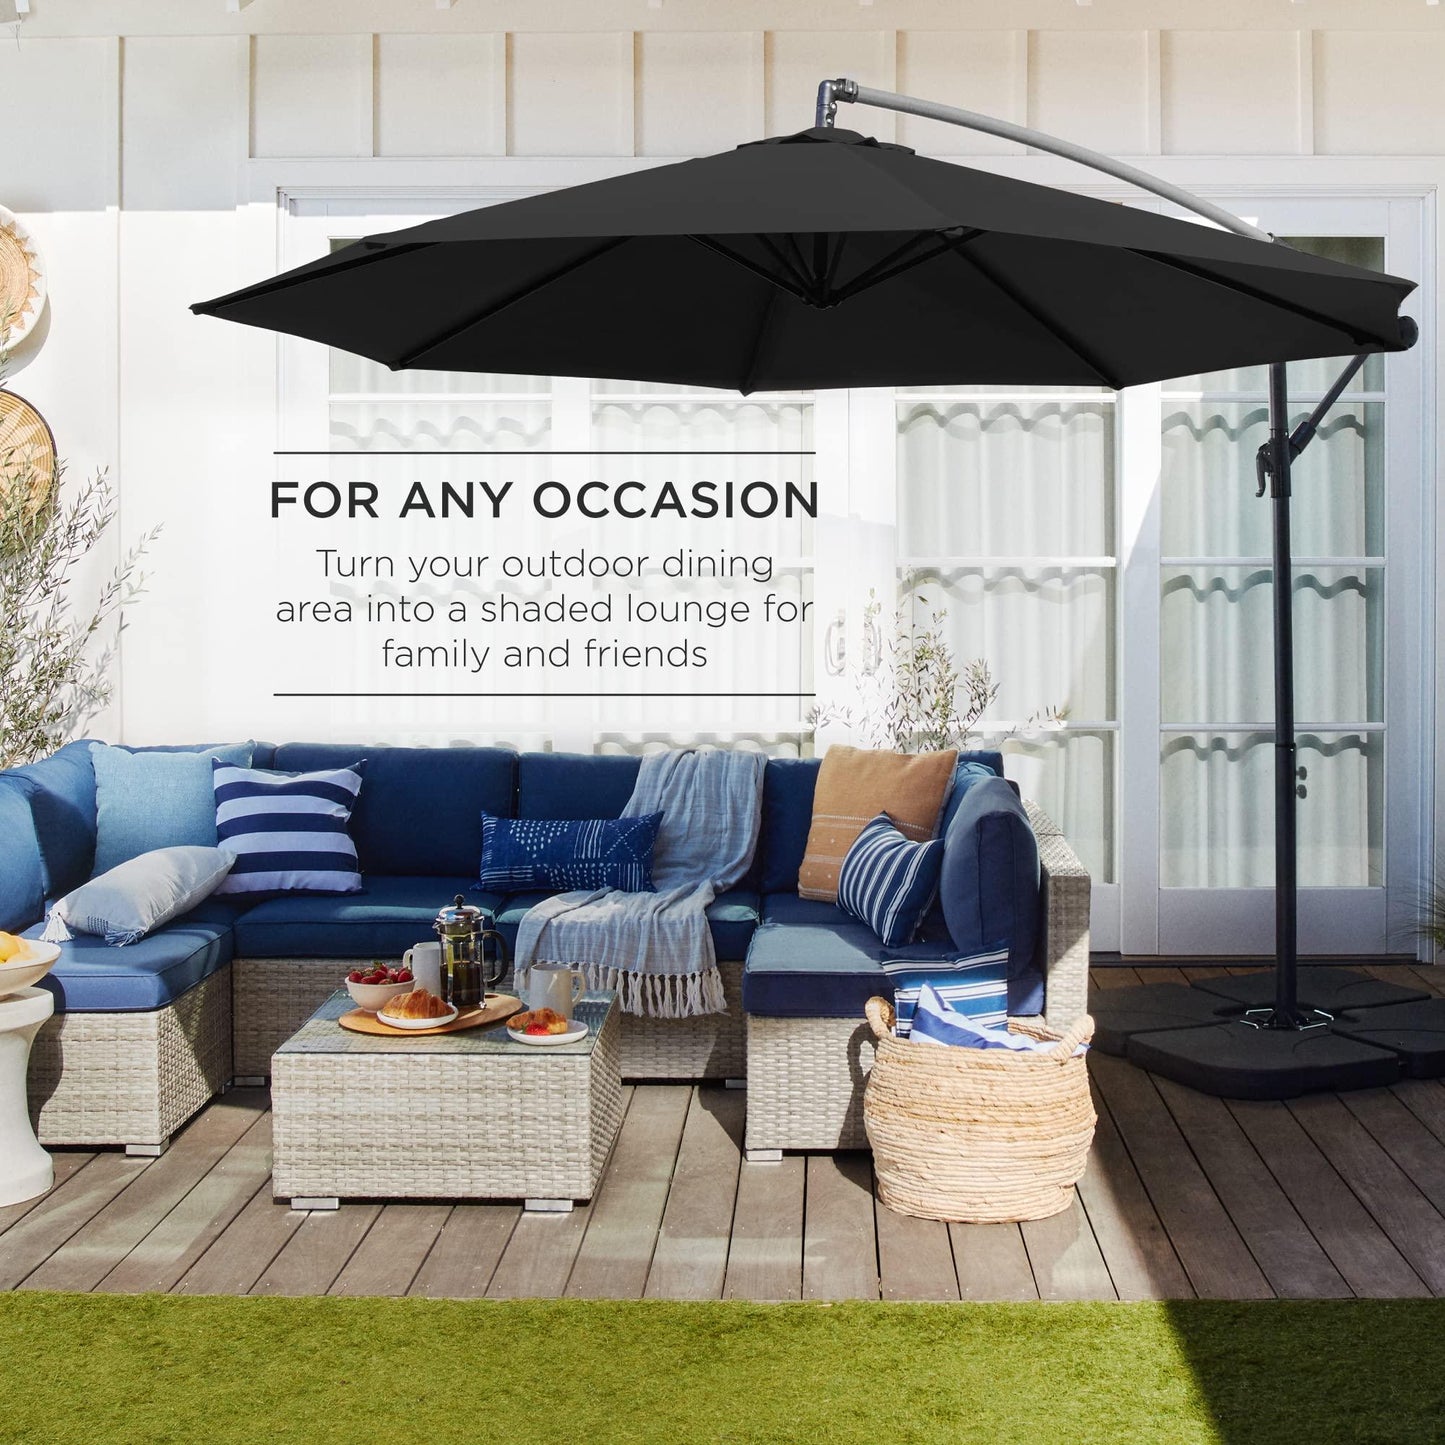 Best Choice Products 10ft Offset Hanging Market Patio Umbrella w/Easy Tilt Adjustment, Polyester Shade, 8 Ribs for Backyard, Poolside, Lawn and Garden - Black - CookCave